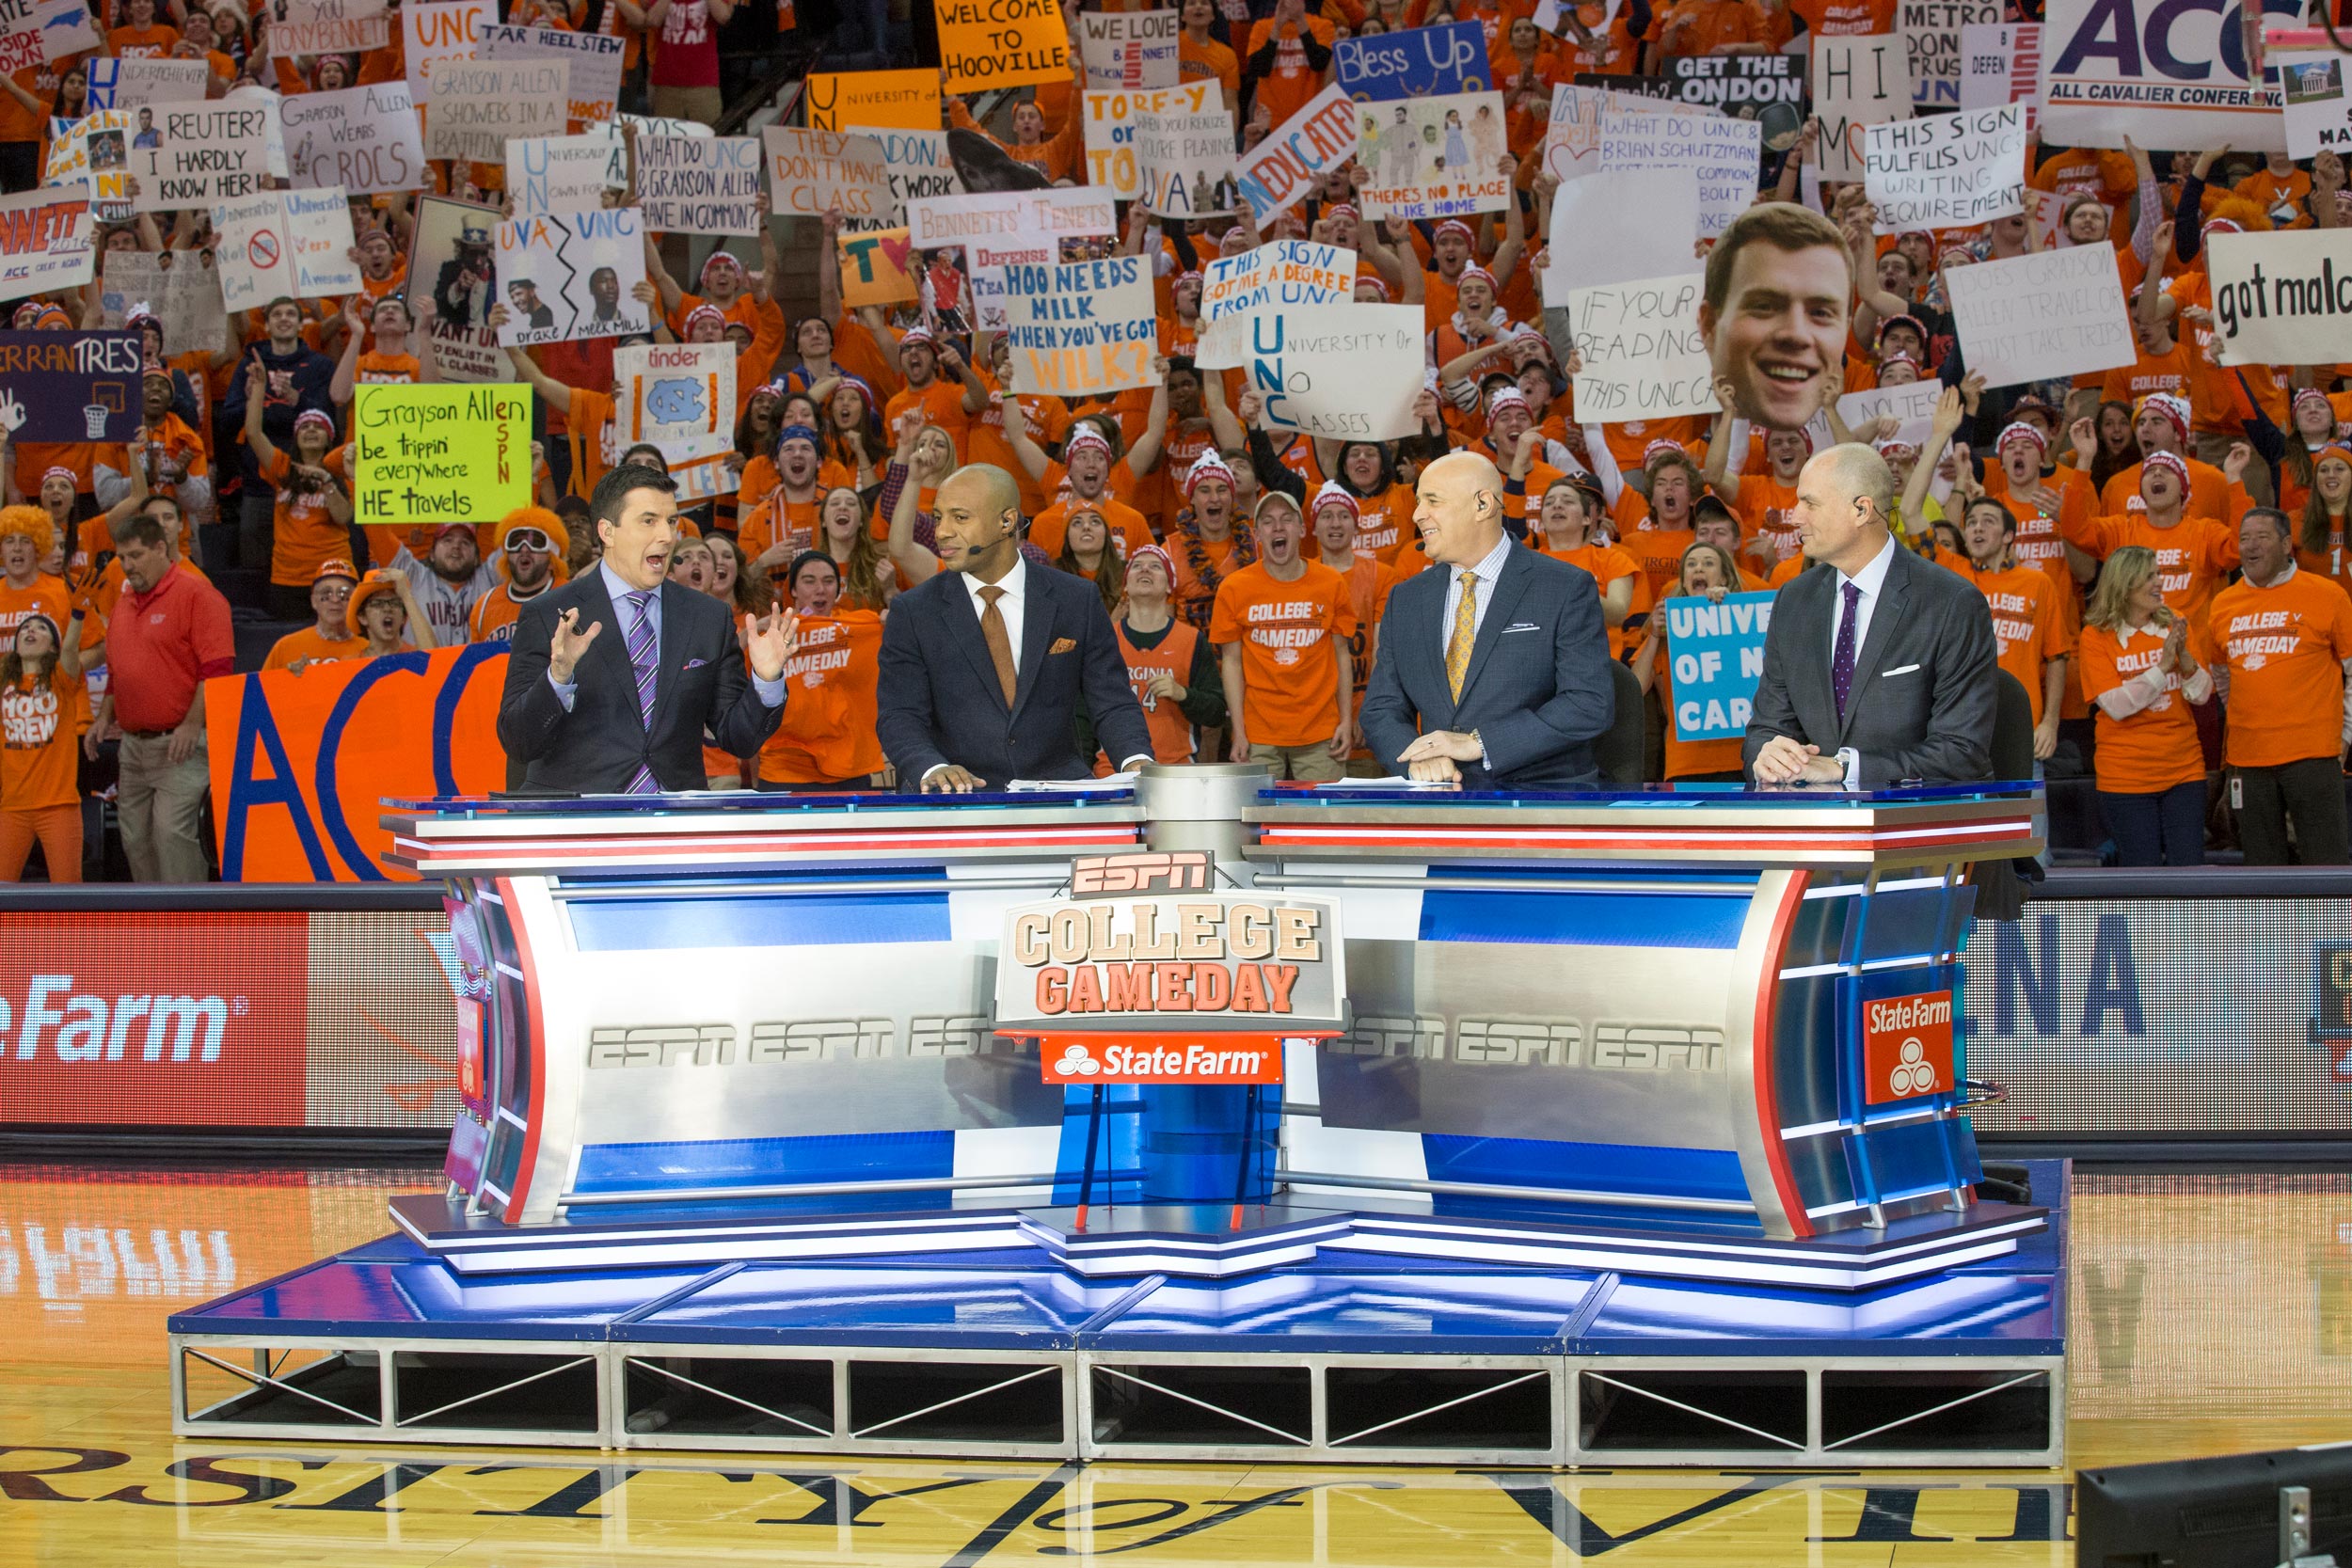 College Game Day setup on basketball court with UVA Fans behind them